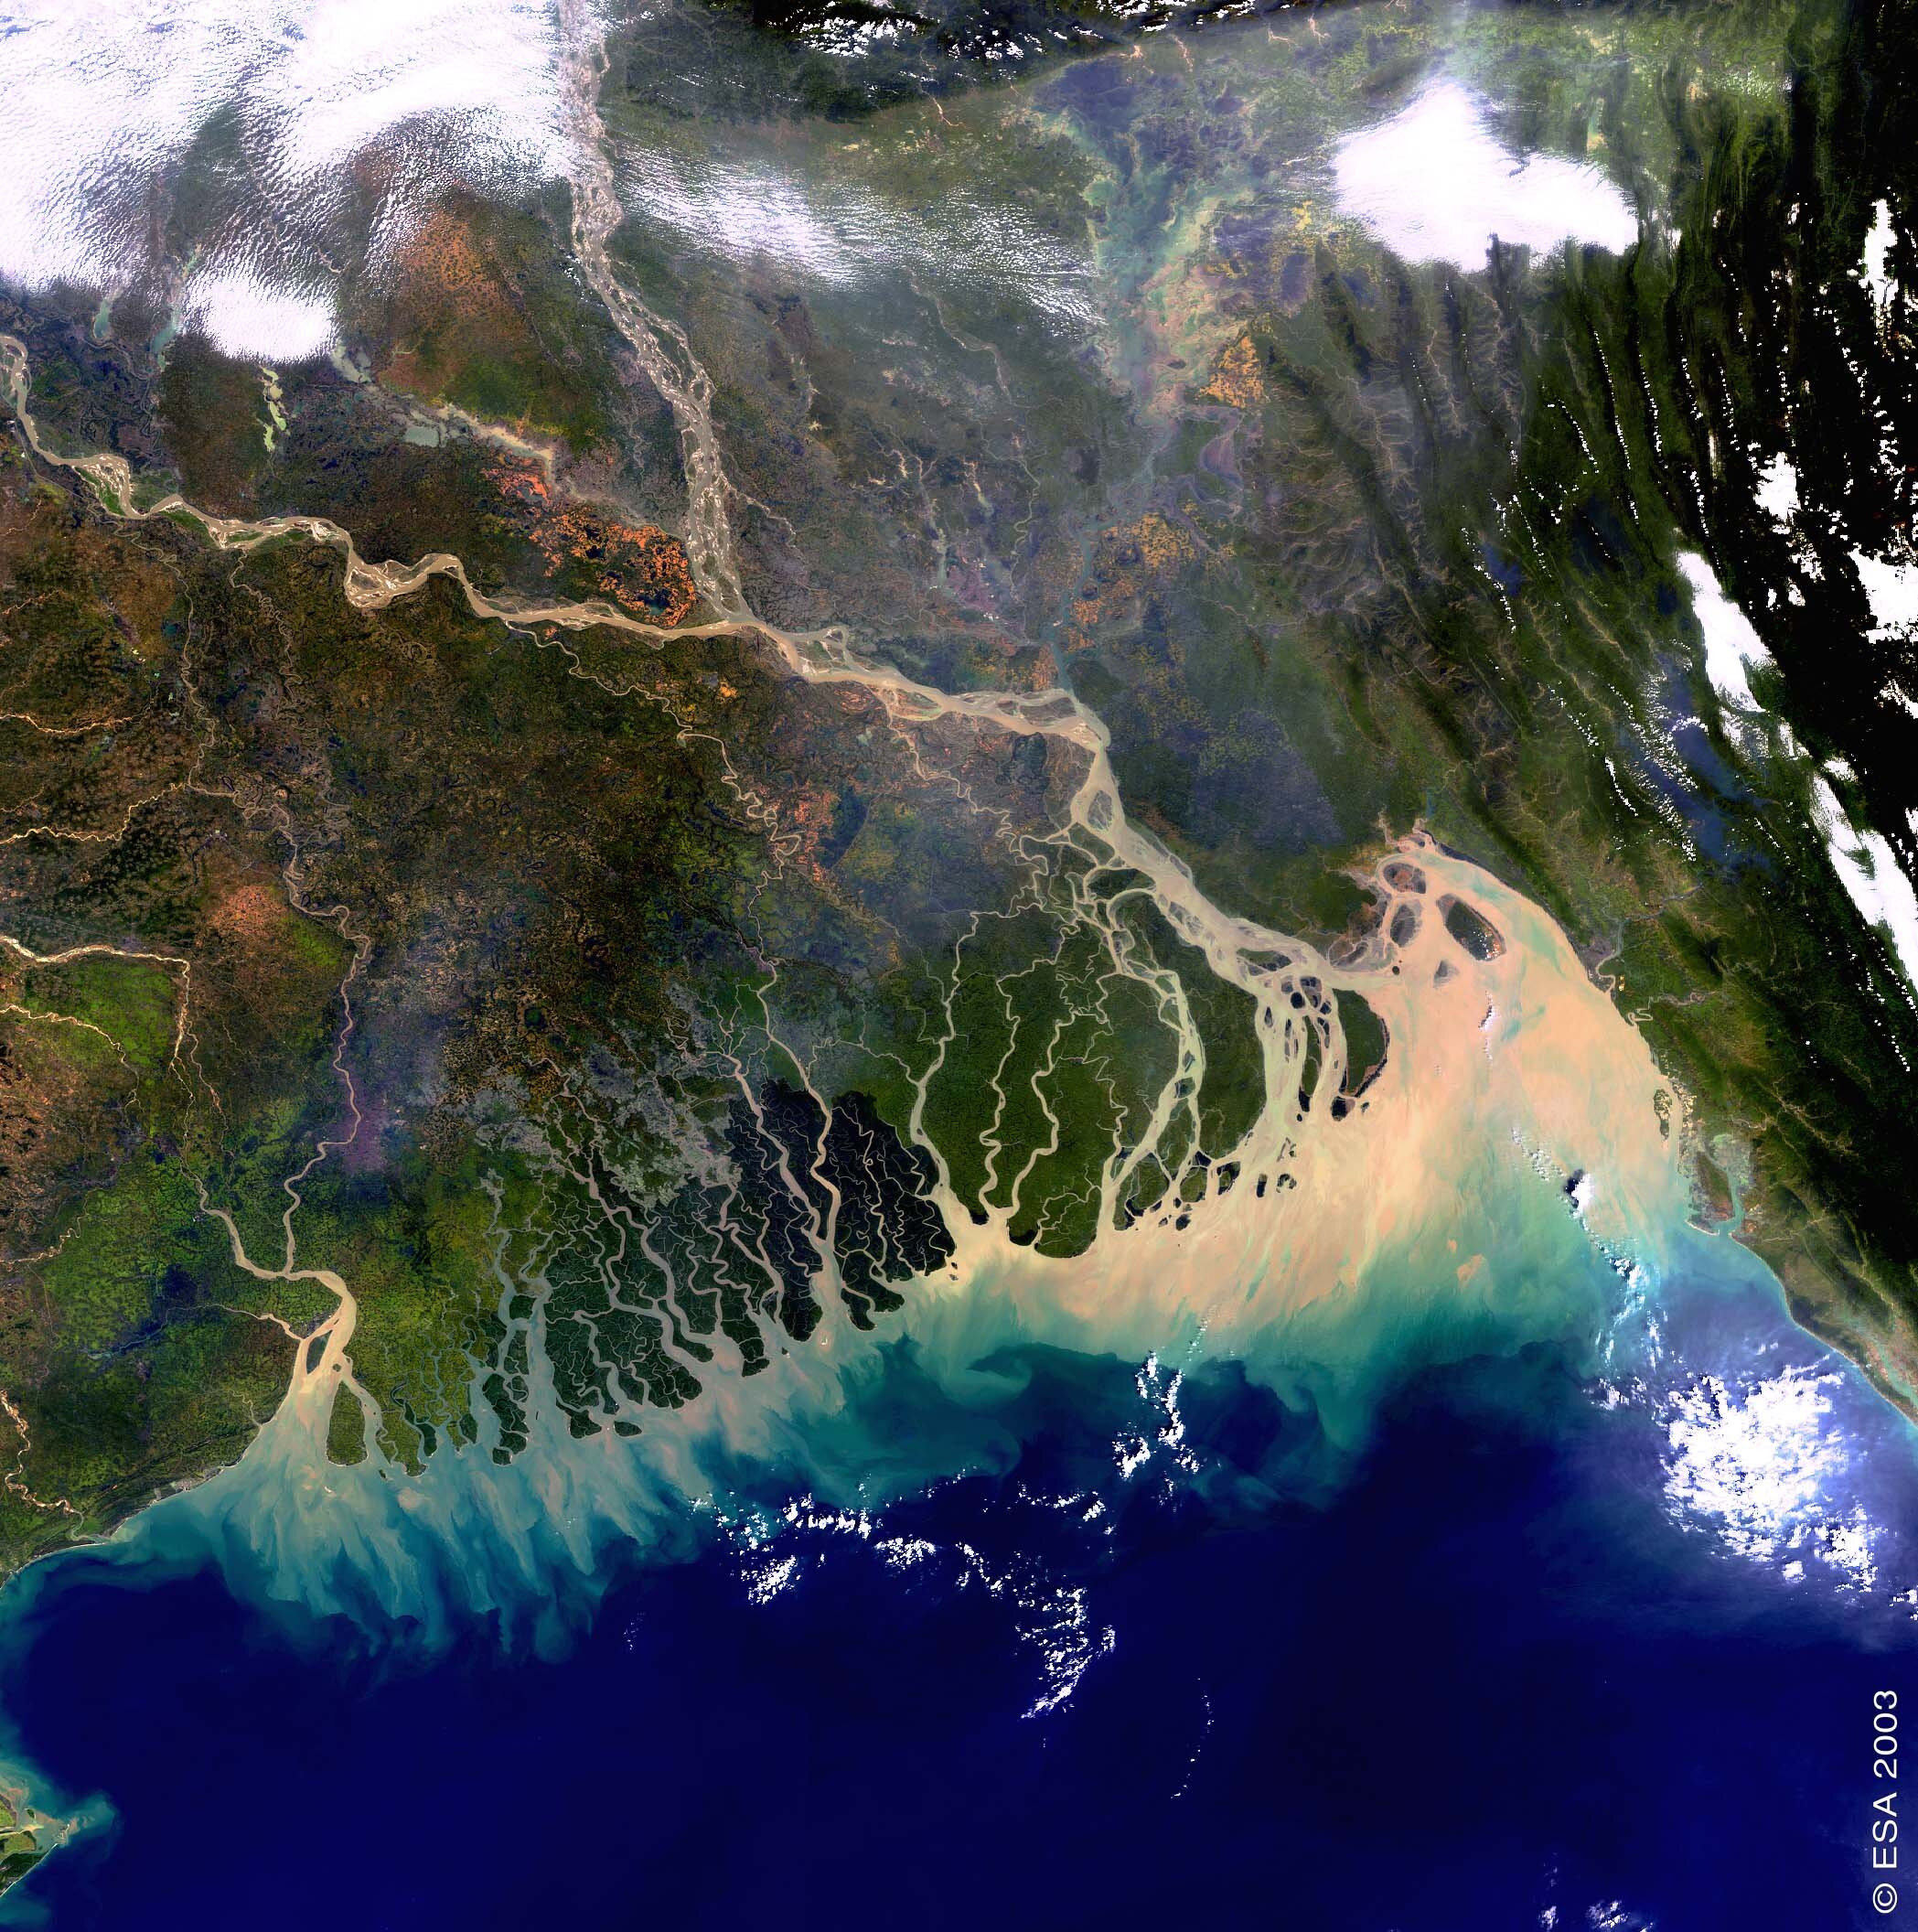 A better estimate of water-level rise in the Ganges delta